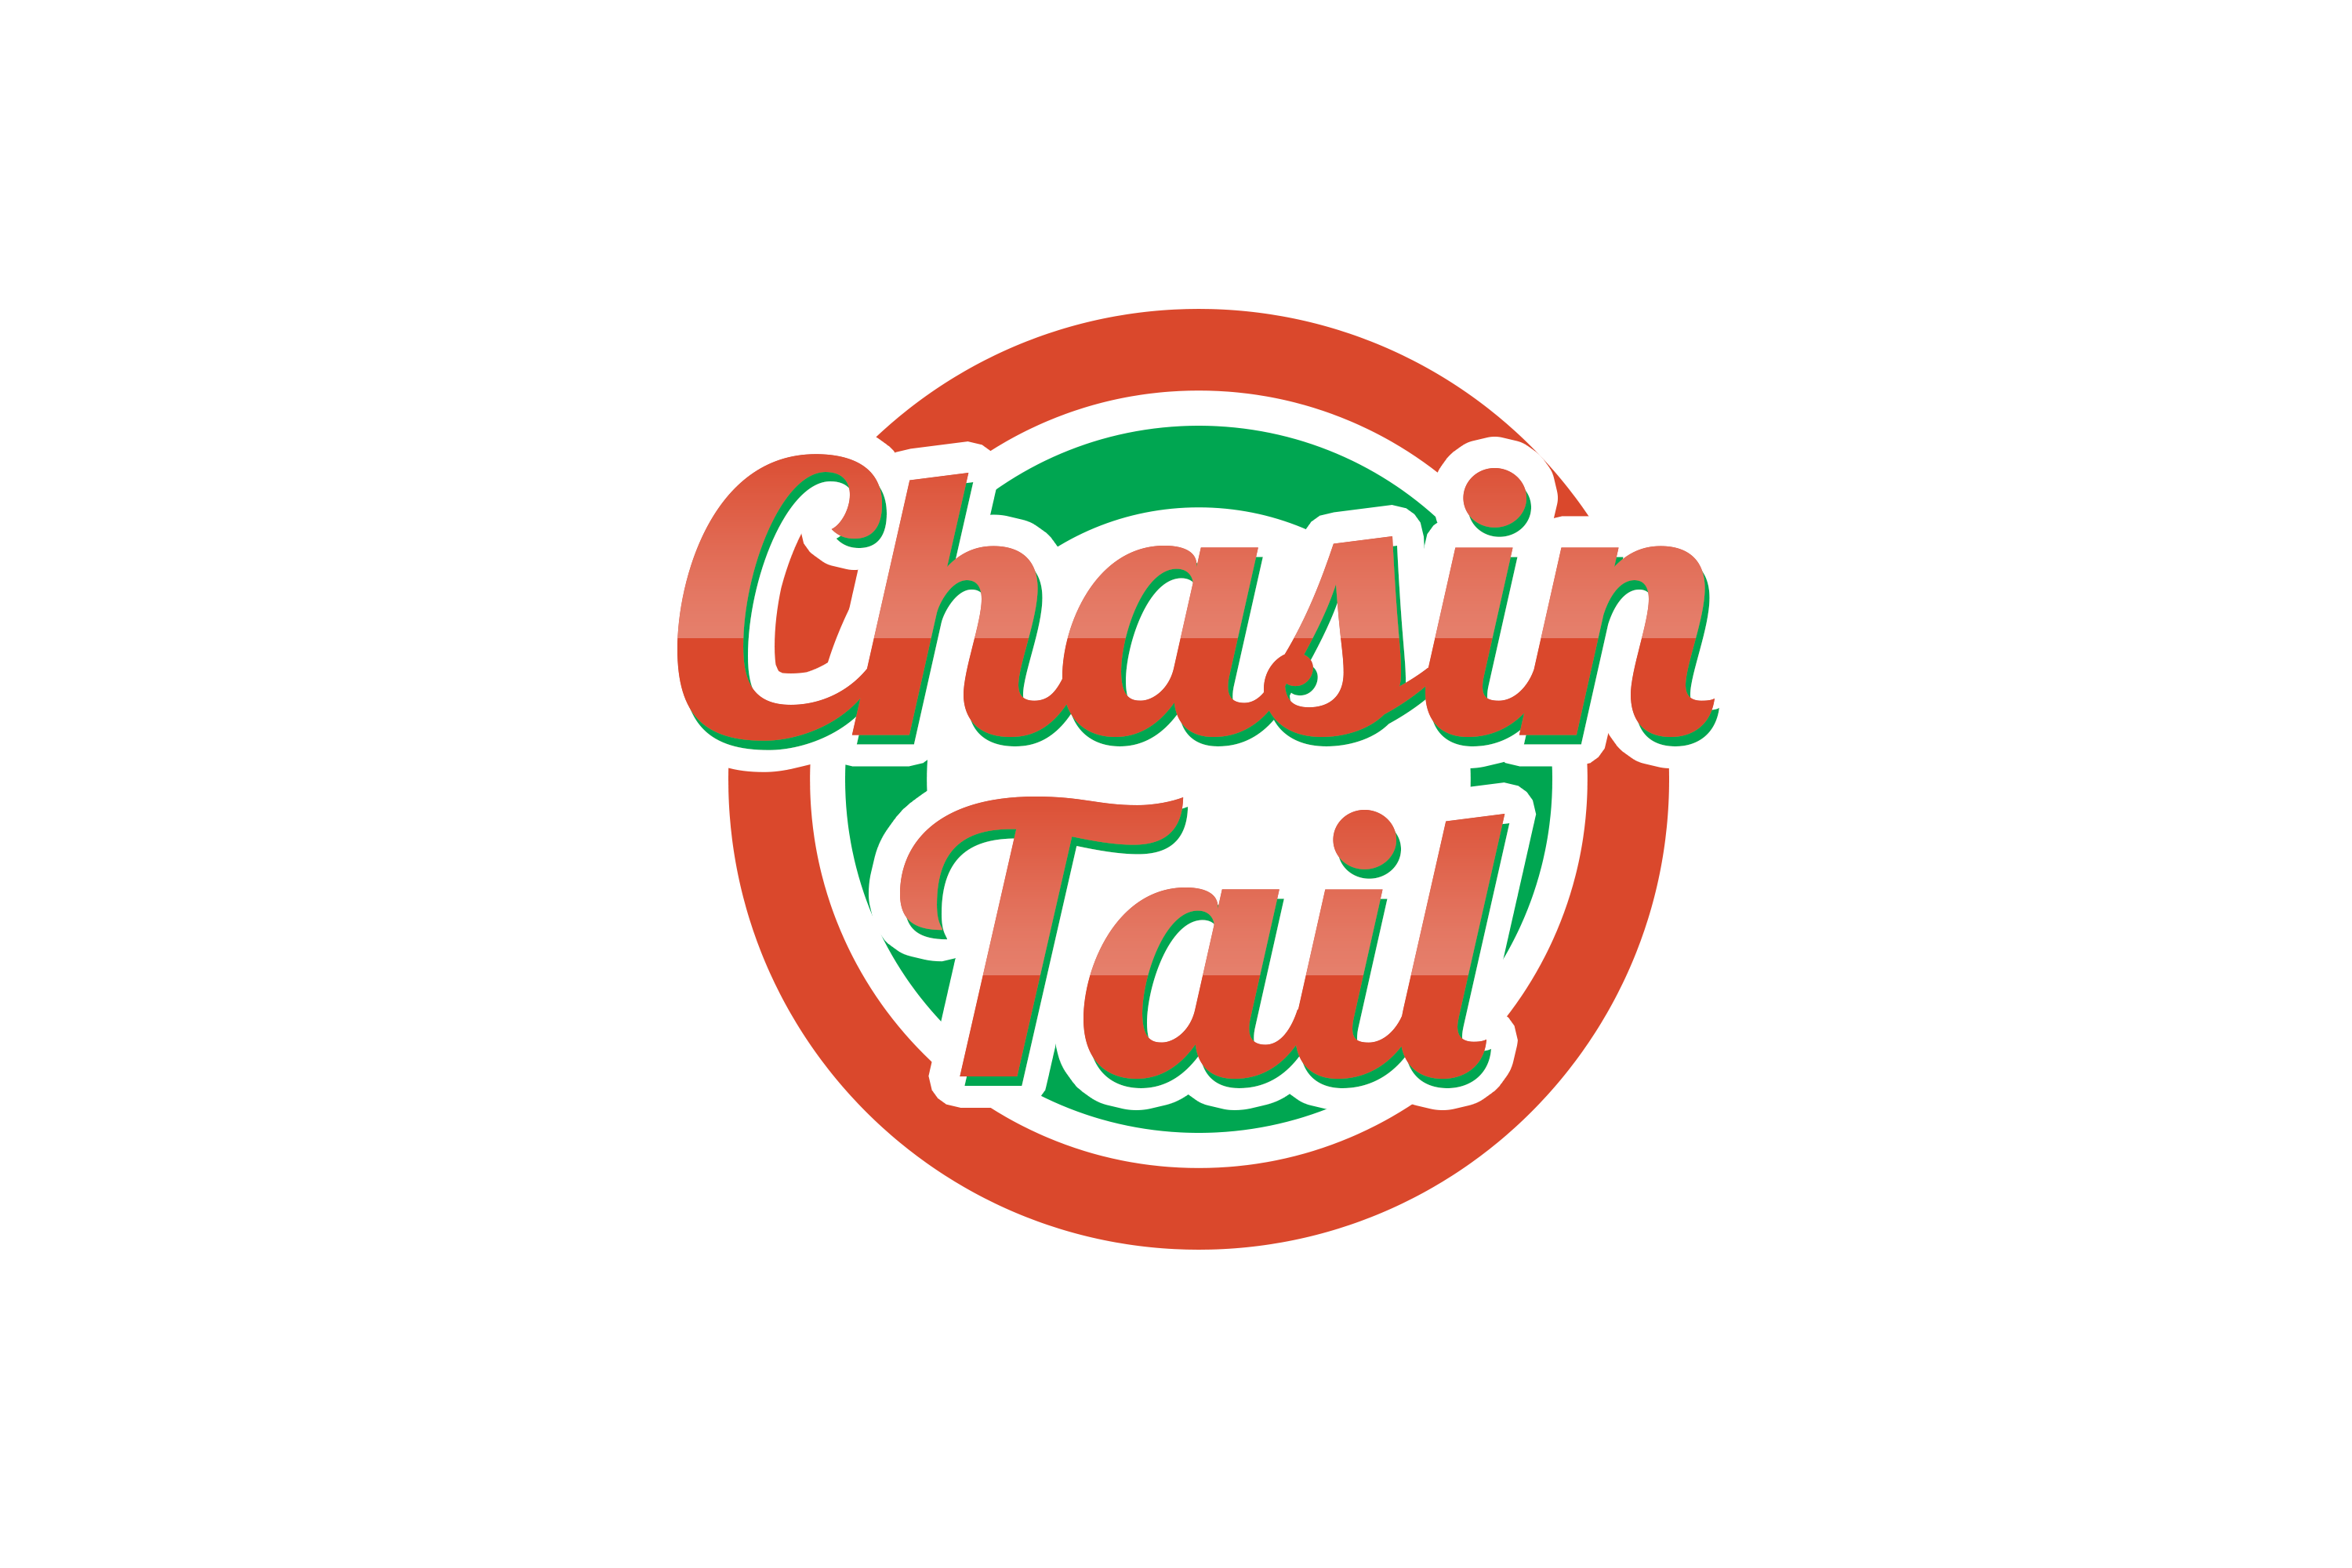 Chasing Tail is a great accessory for cars everywhere.